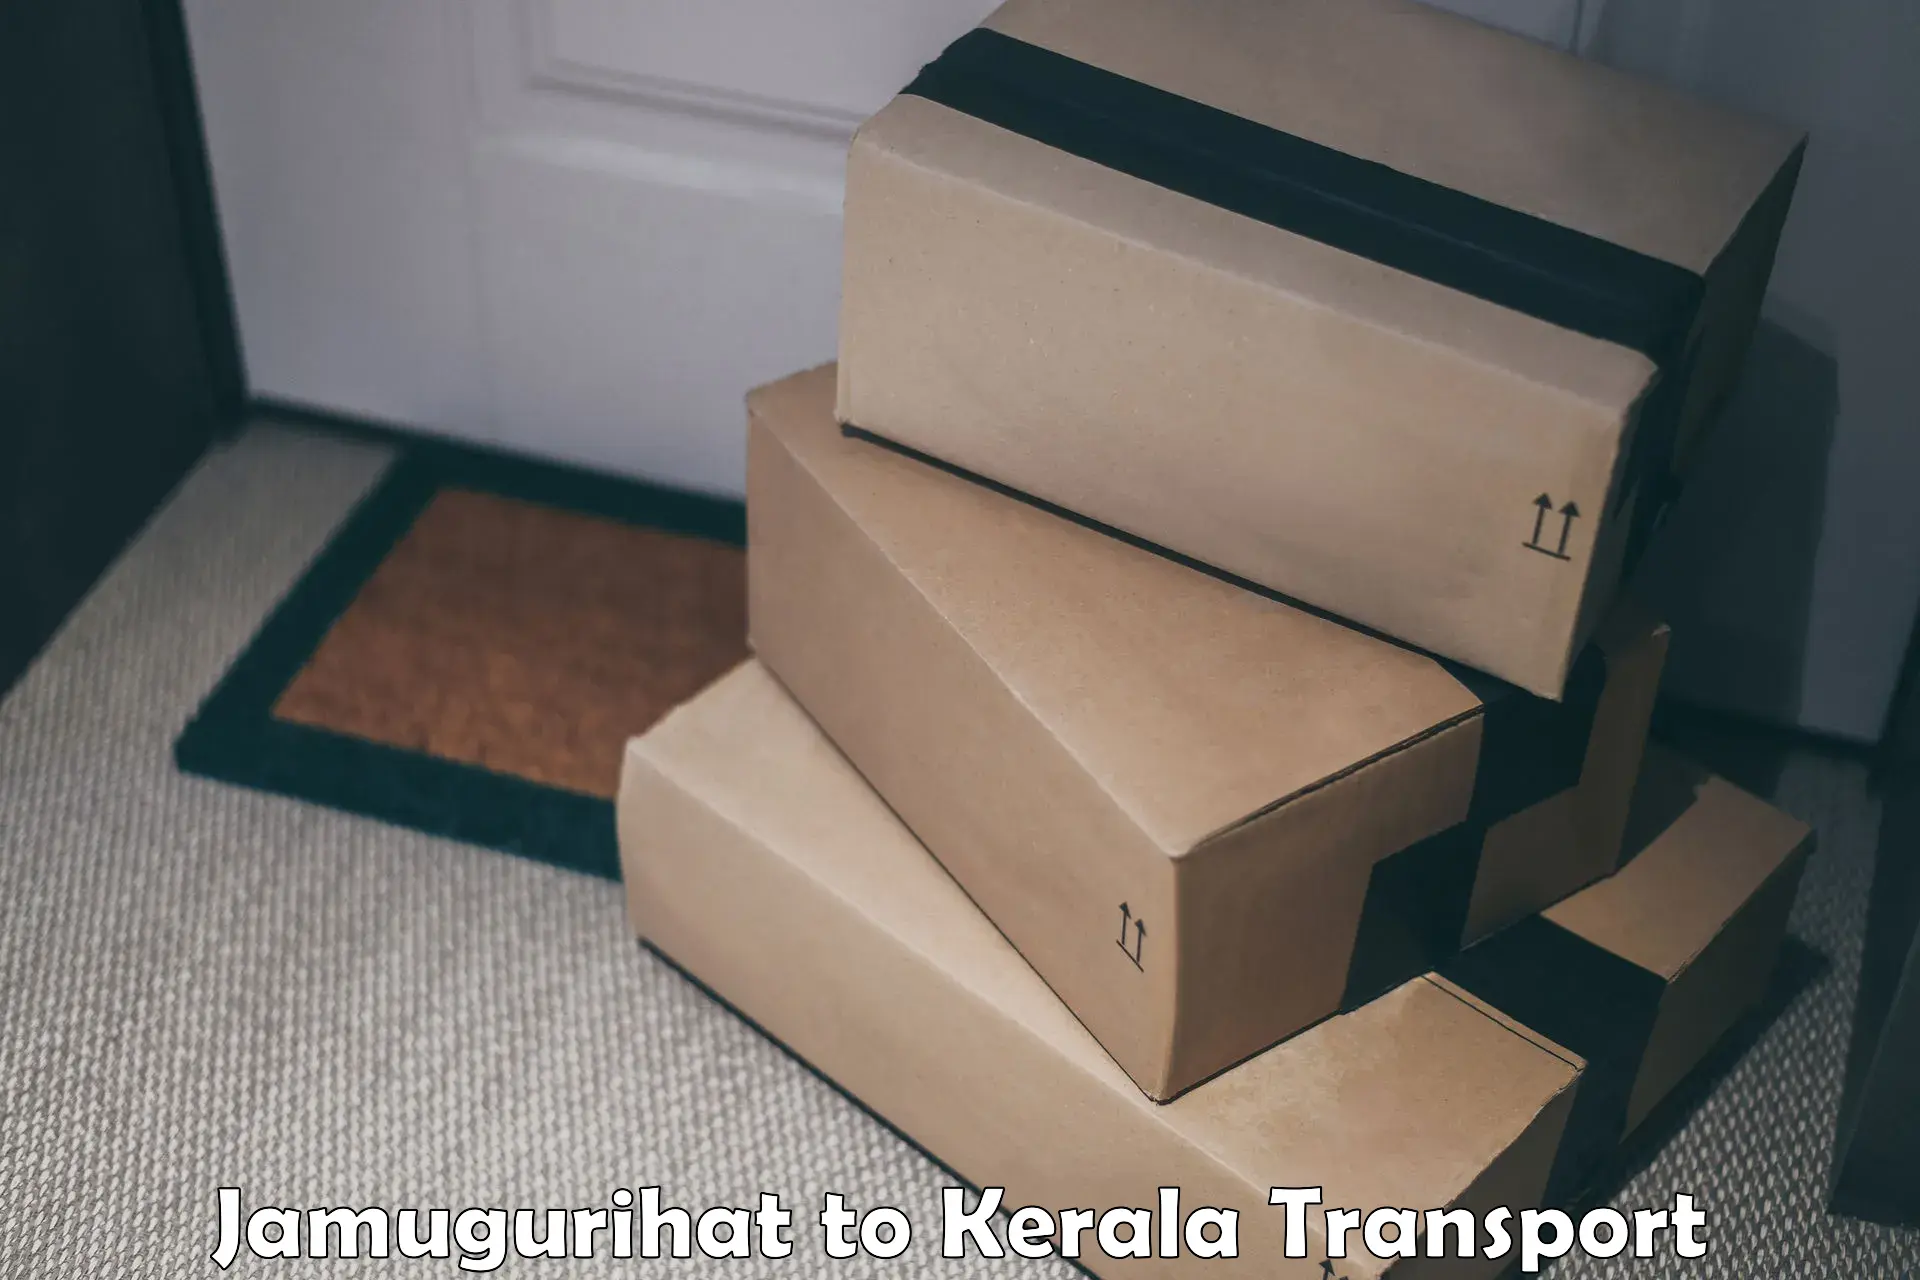 Shipping services Jamugurihat to Thrissur